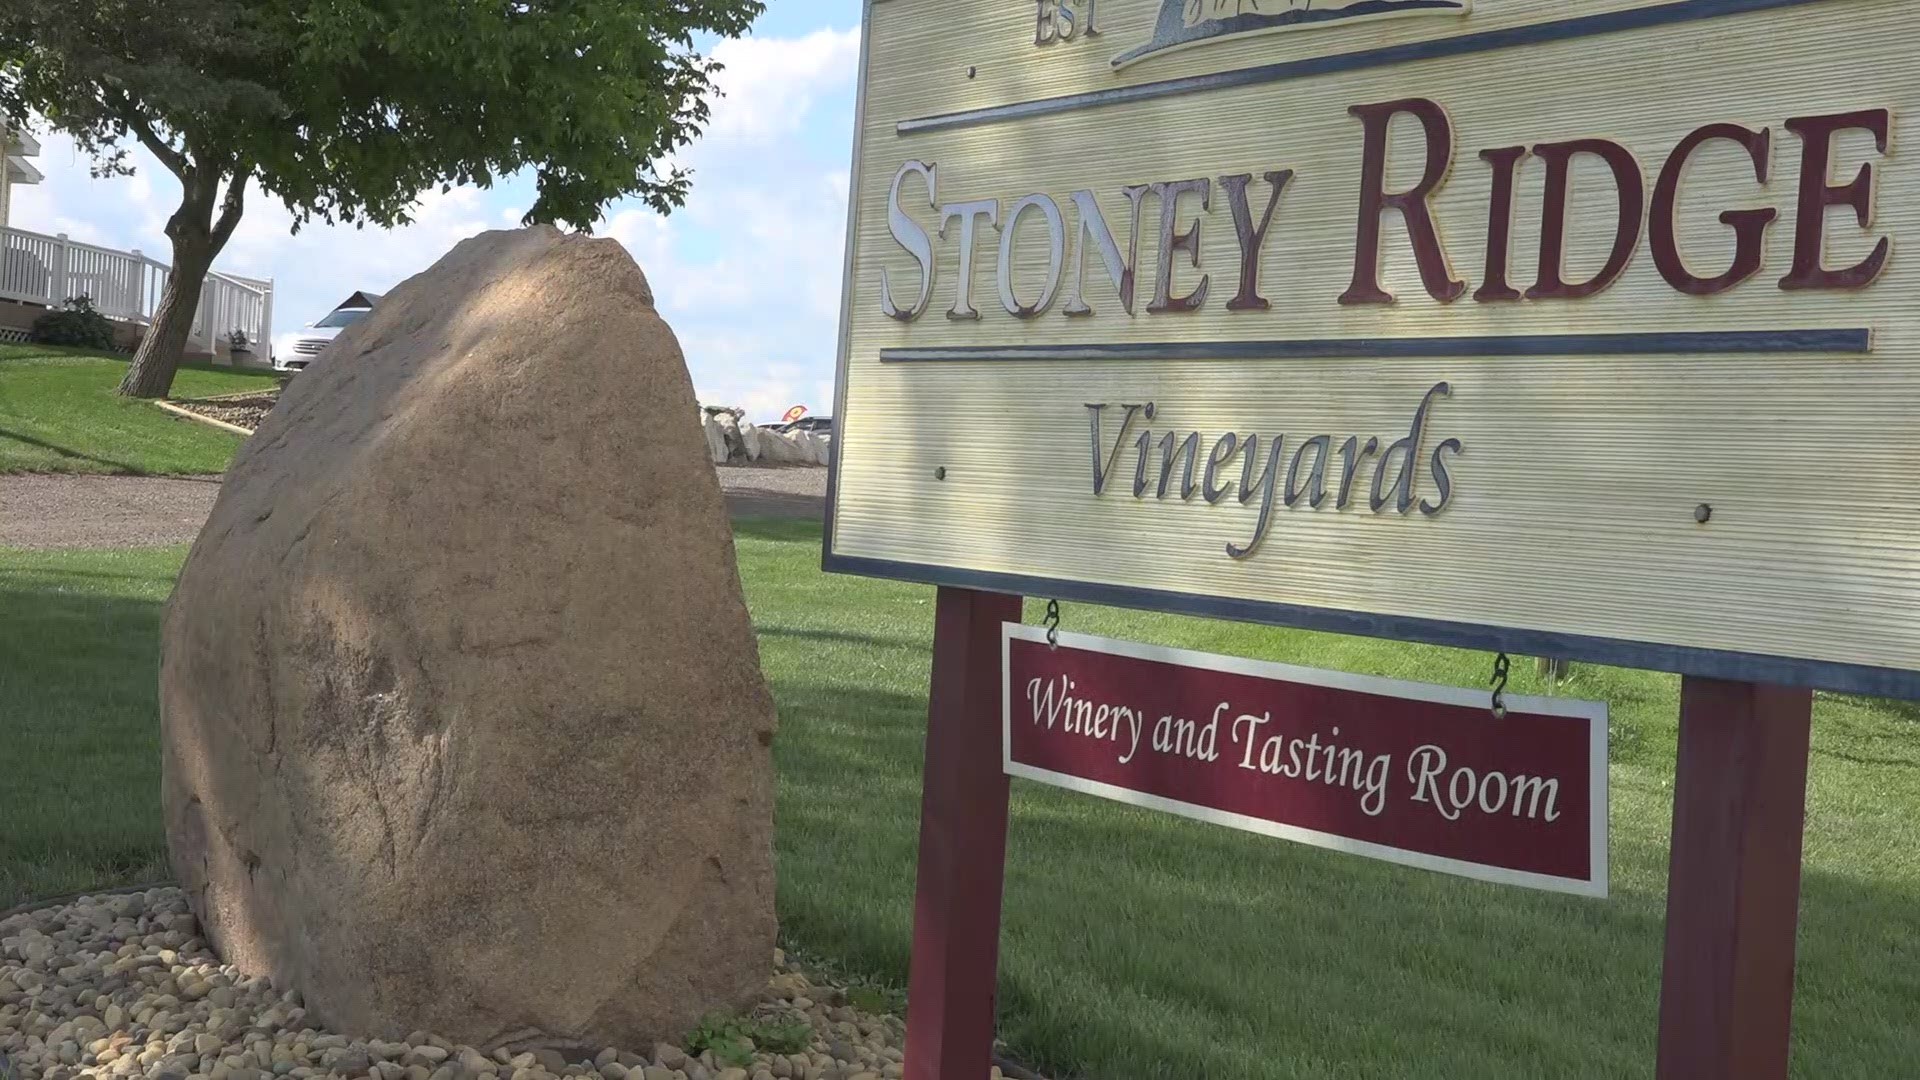 What's offered at Stoney Ridge Vineyards in Kent City